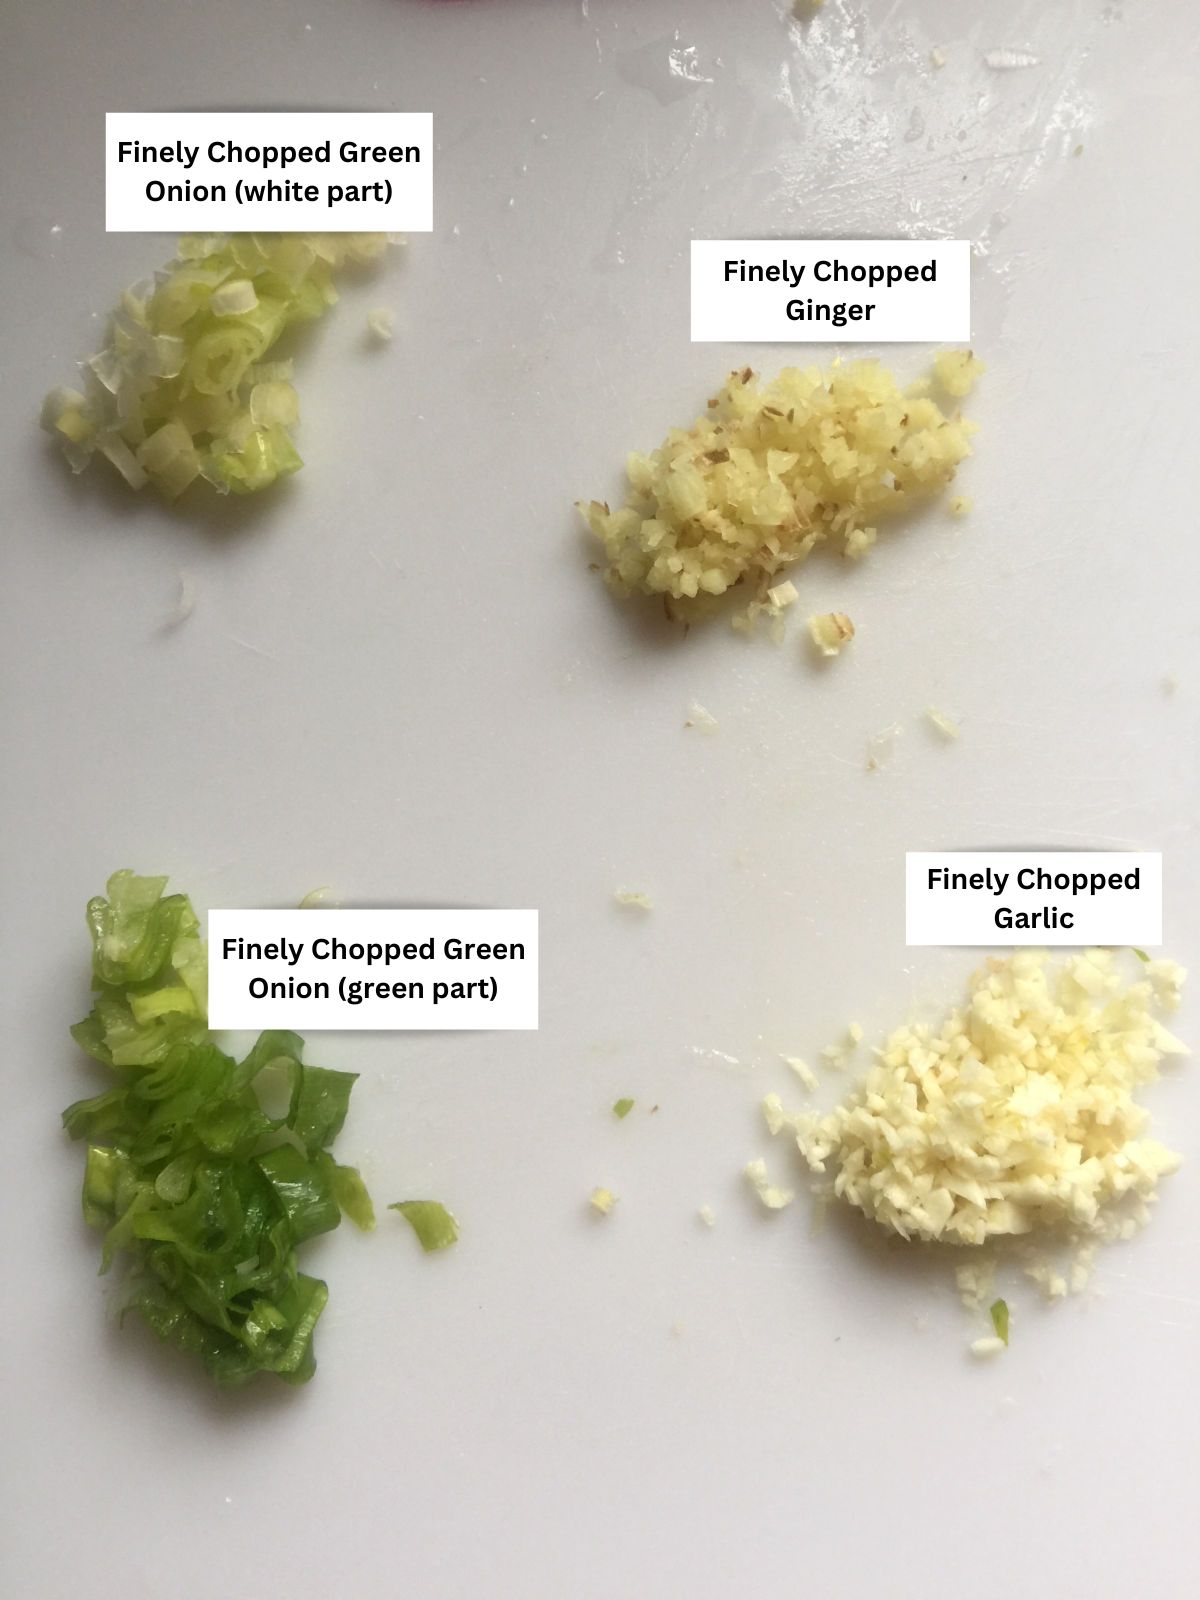 Labeled finely chopped green onion, ginger, and garlic.